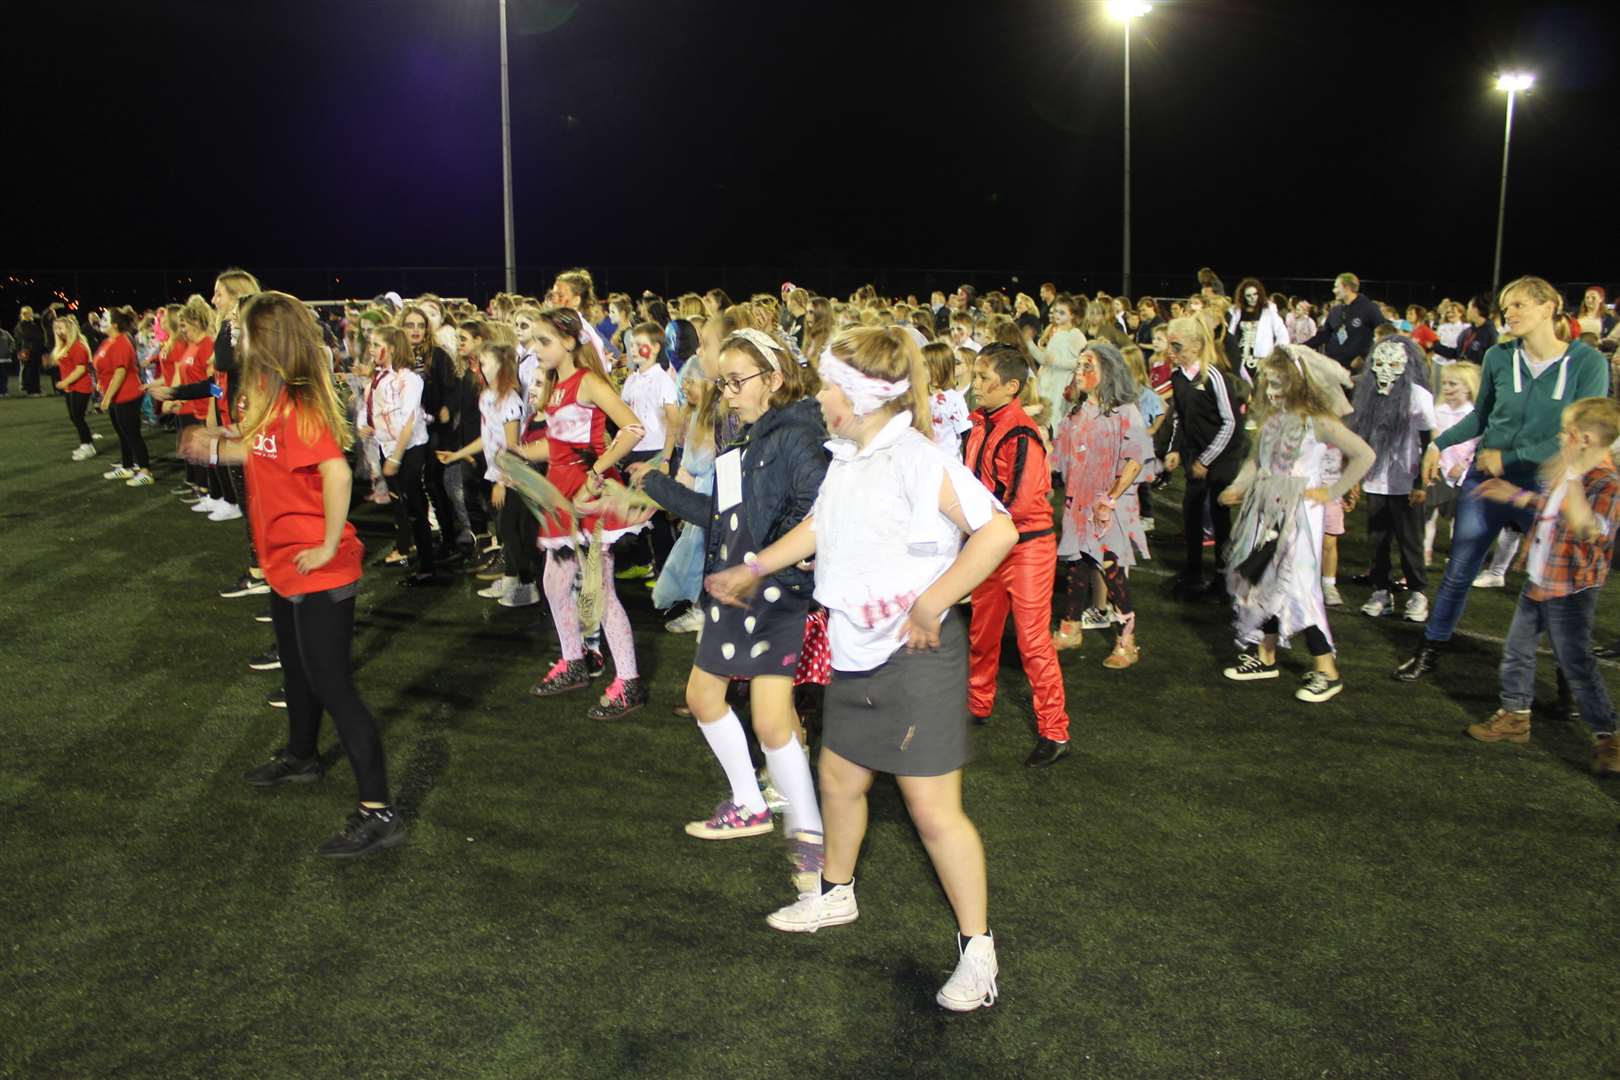 Four hundred students and staff from the Oasis Academy, Sheppey, broke their own record of 394 to perform Michael Jackson's Thriller dance